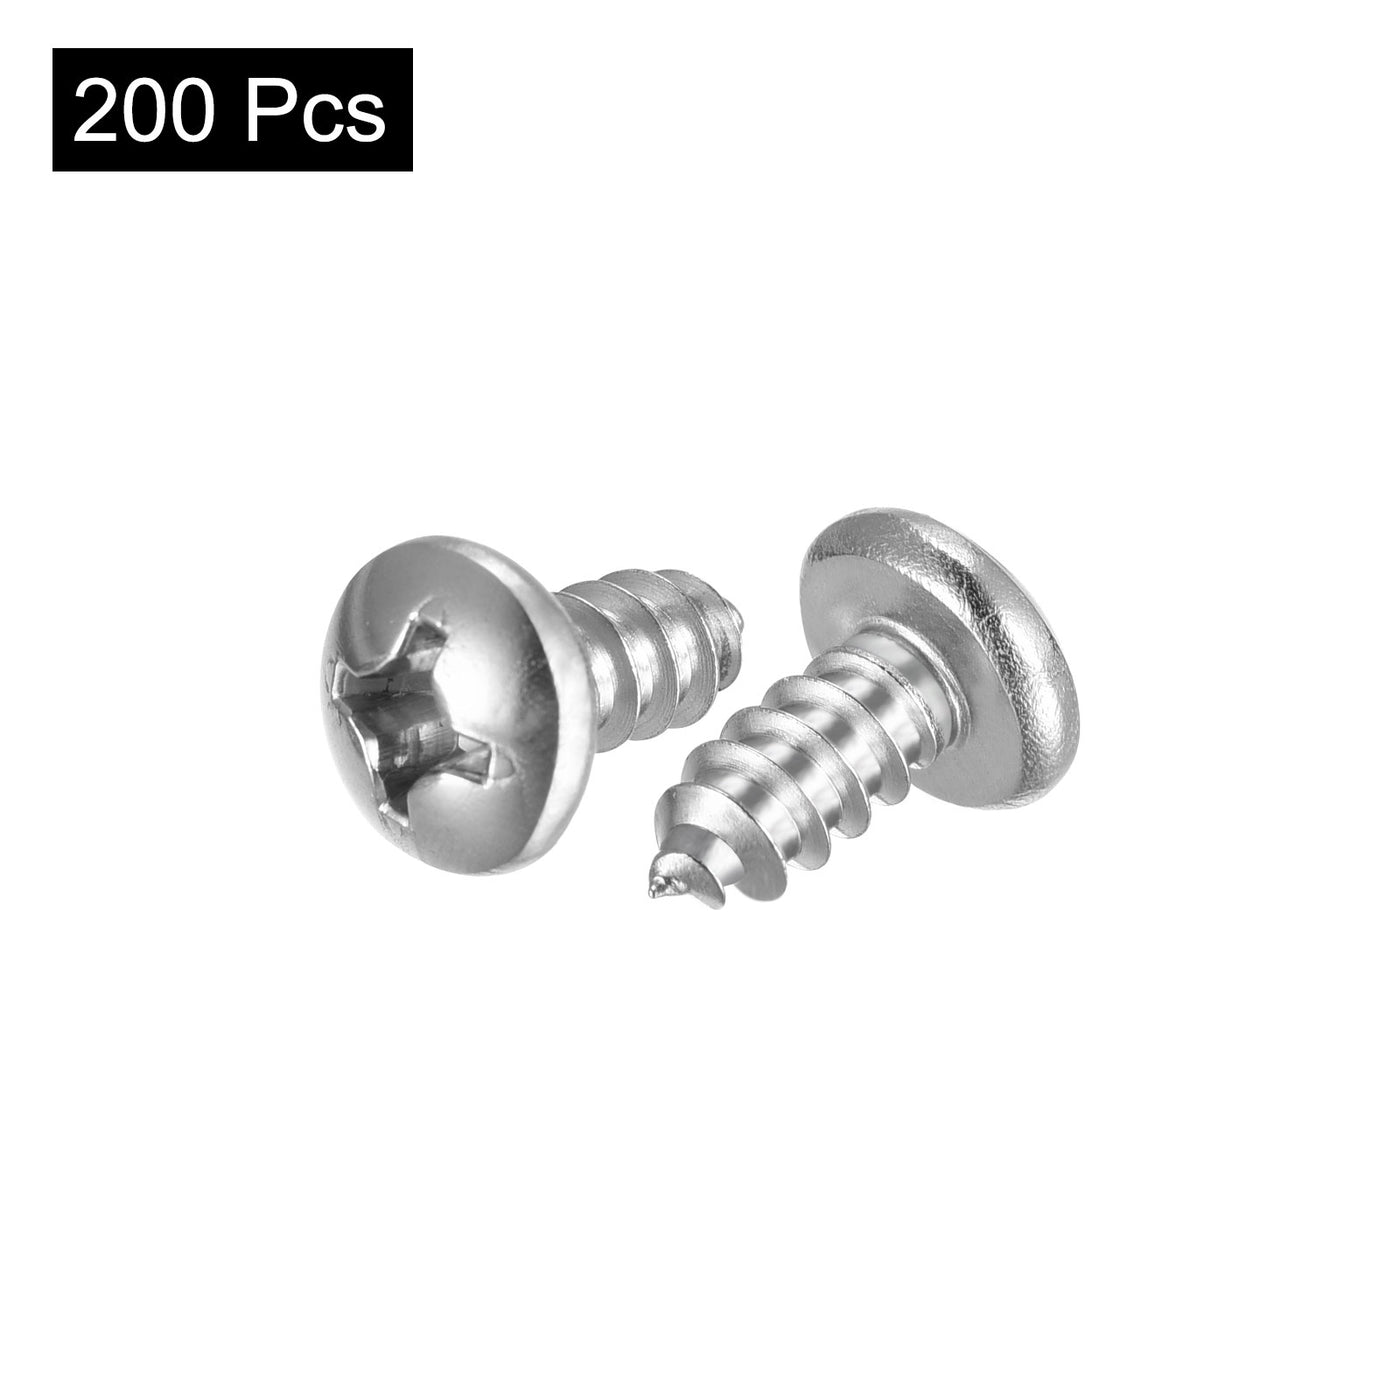 uxcell Uxcell Screws #4x1/4" Phillips Self Tapping Screw 304 Stainless Steel 200pcs